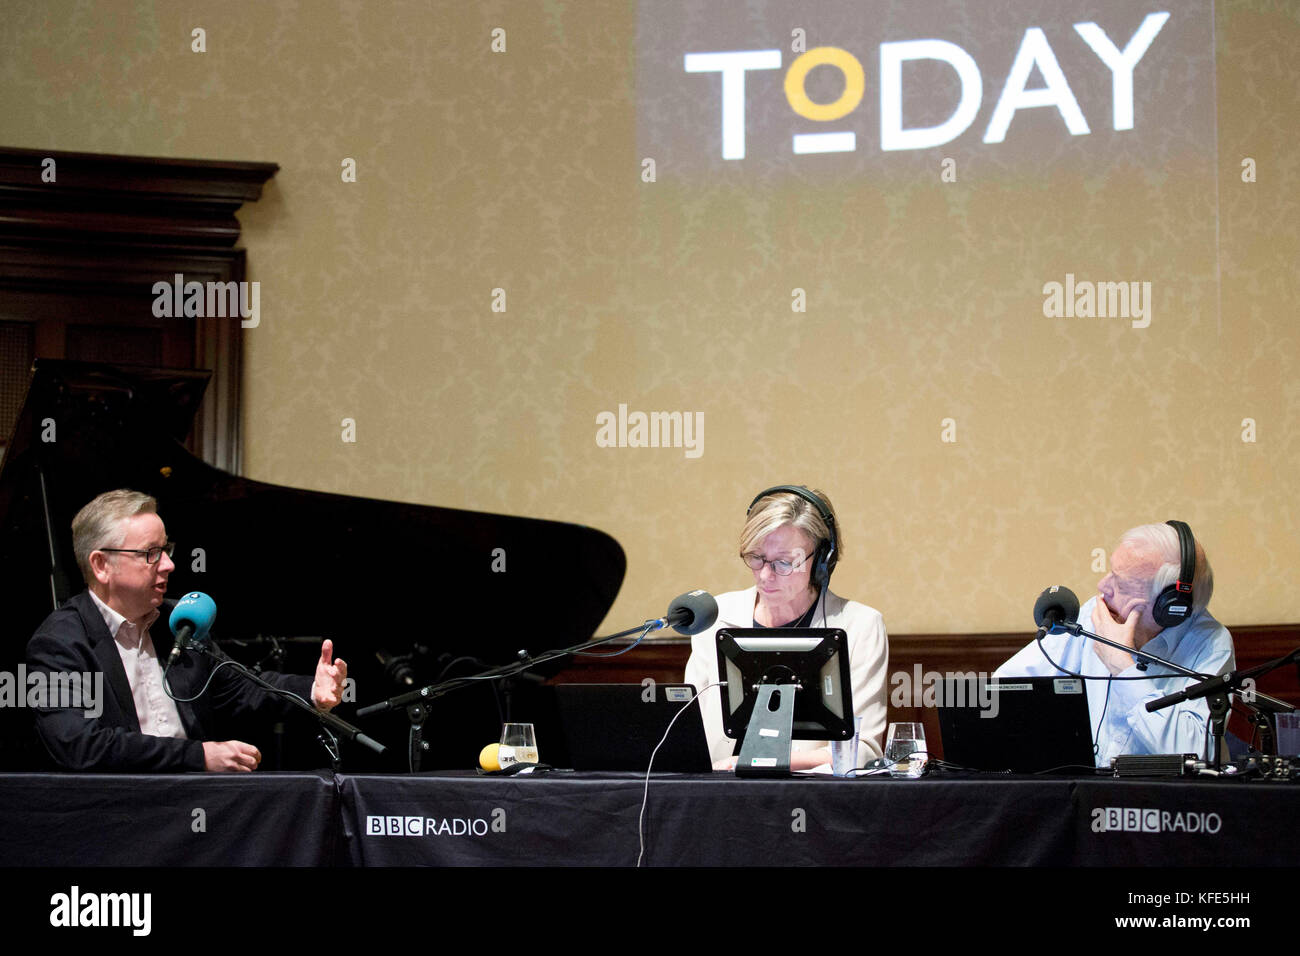 Environment Secretary Michael Gove (left) speaking to BBC Radio 4 presenter Sarah Montague and John Humphrys and at Wigmore Hall in central London, as the BBC Radio 4 programme celebrates its 60th anniversary, where he made an on air joke about disgraced movie mogul Harvey Weinstein. Stock Photo